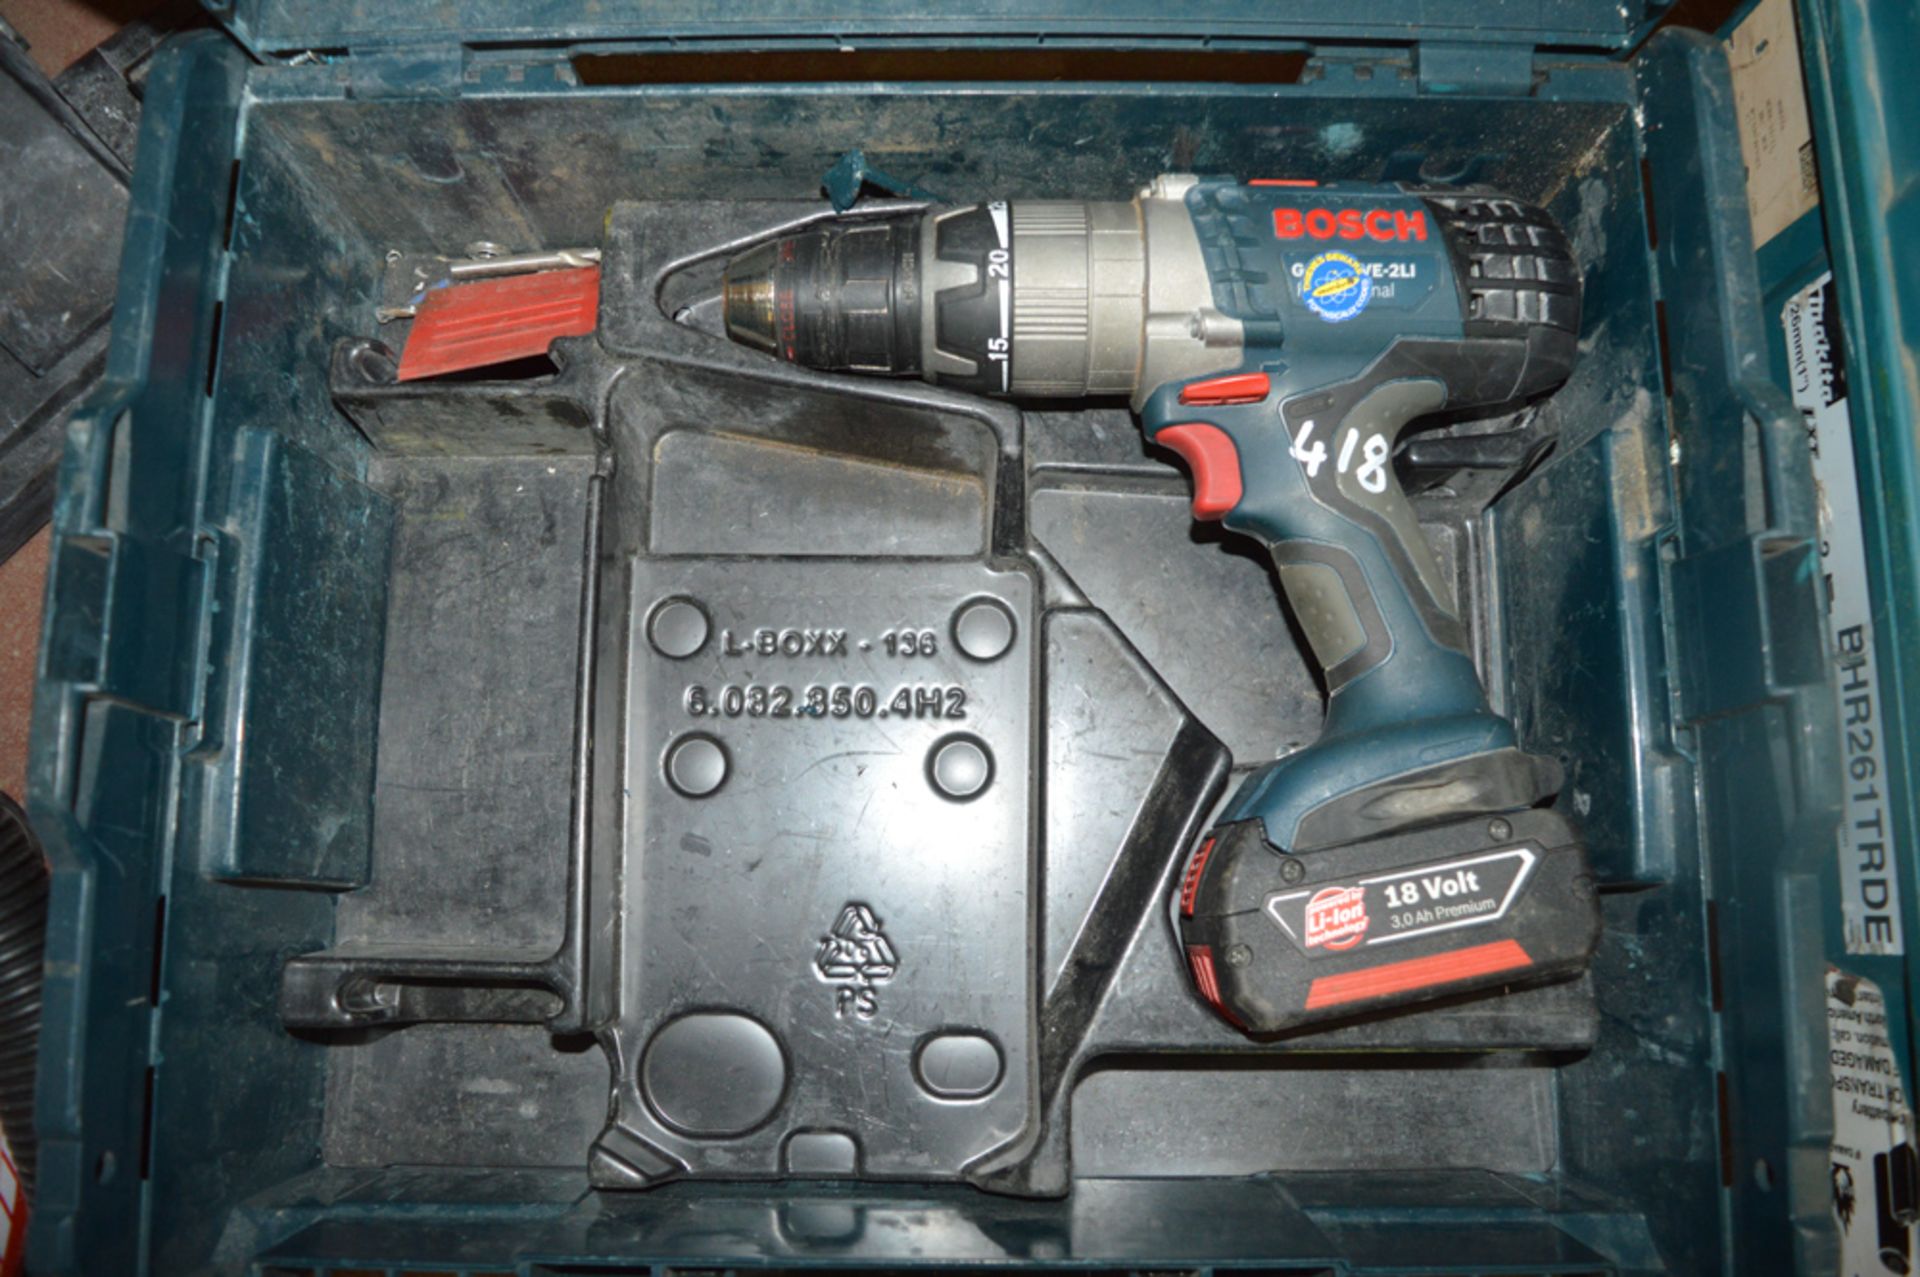 Bosch 18v cordless hammer drill c/w battery & carry case **No charger** 0295-K0106